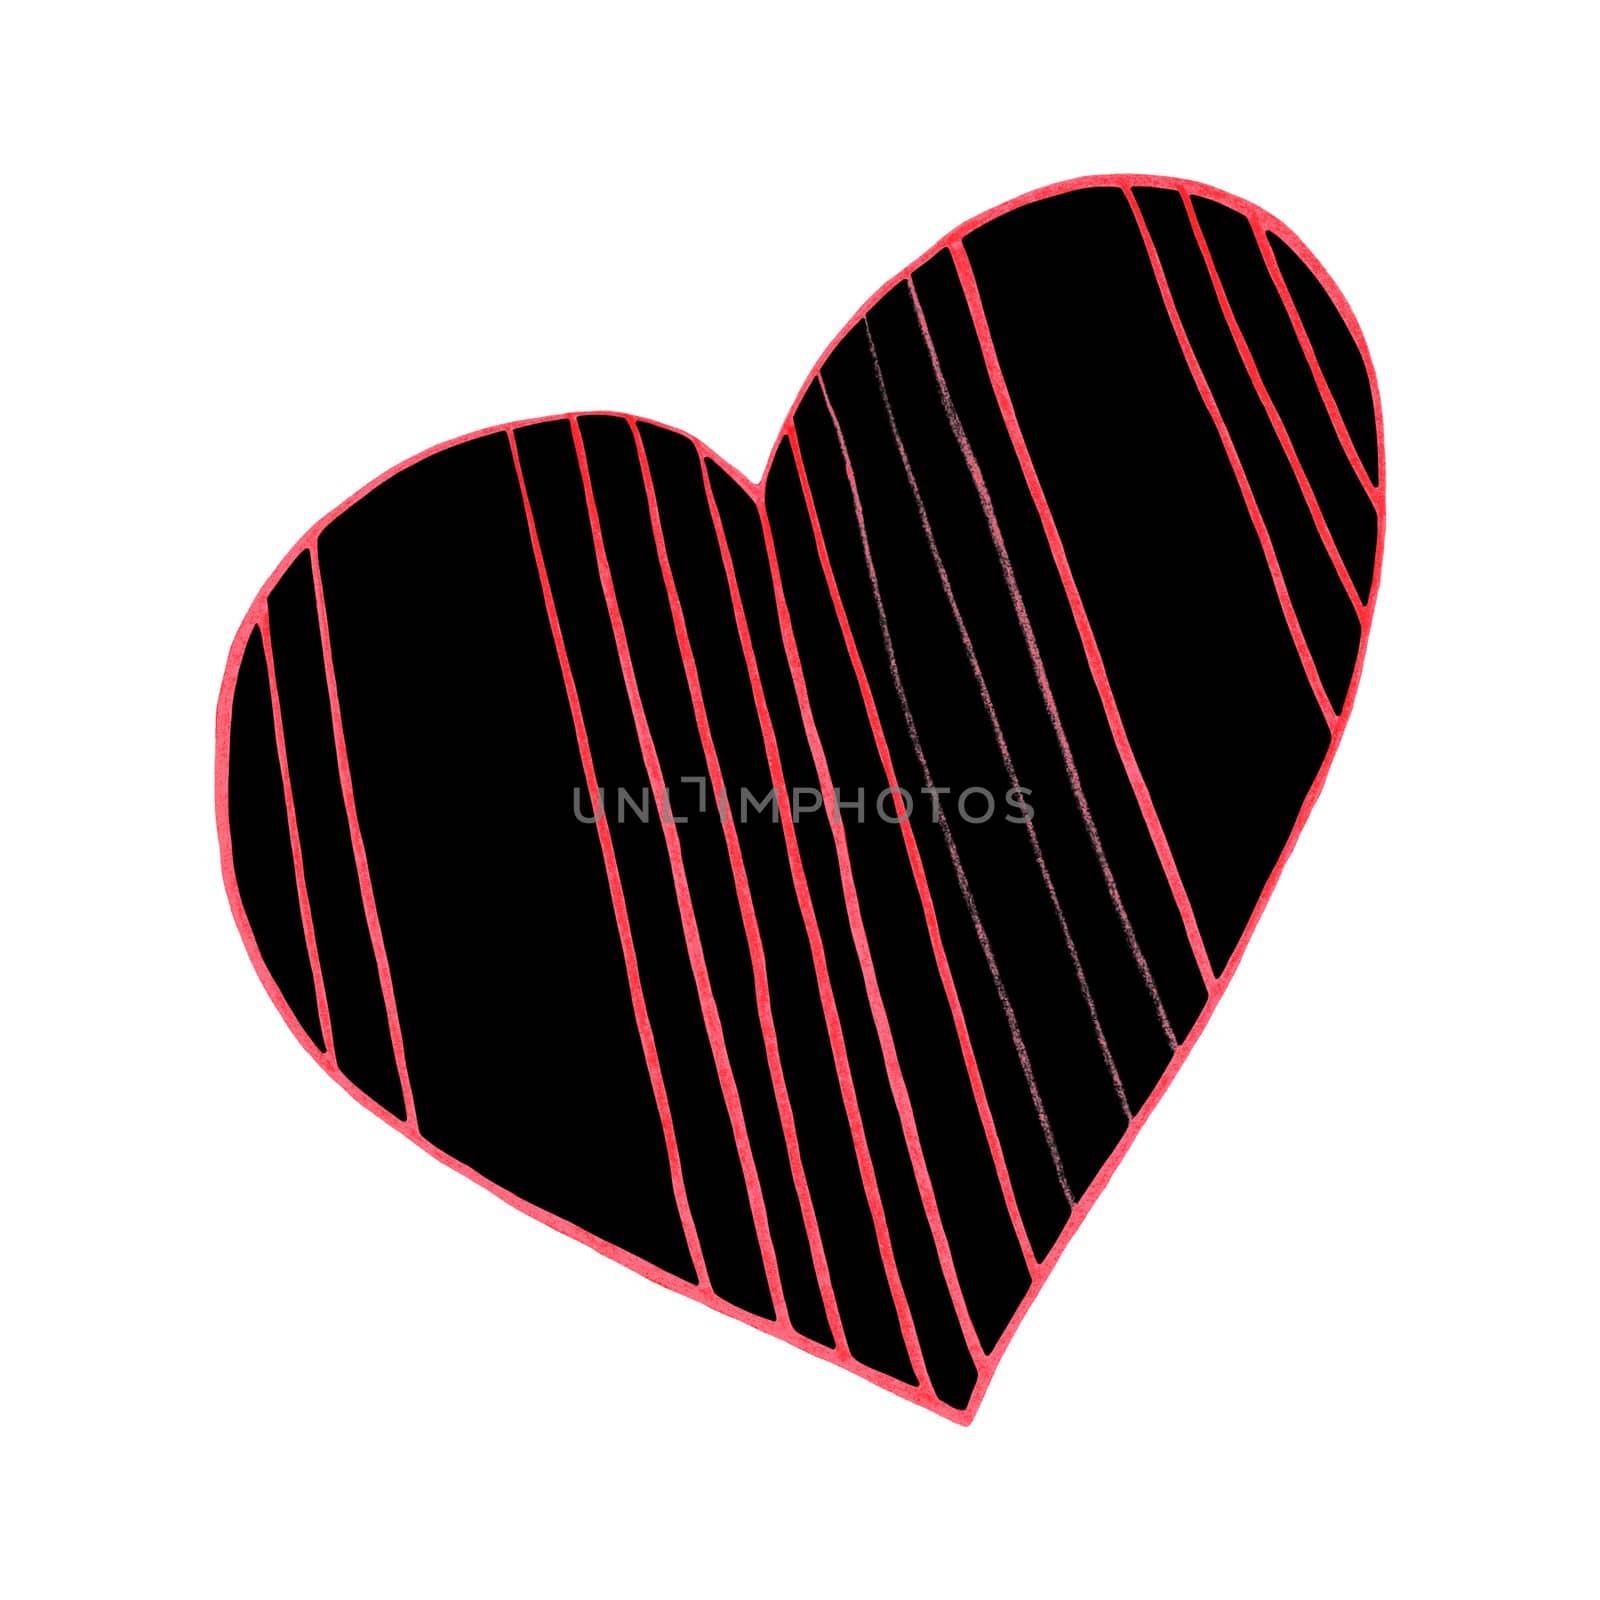 Red and Black Heart Drawn by Colored Pencil. Heart Shape Isolated on White Background. by Rina_Dozornaya